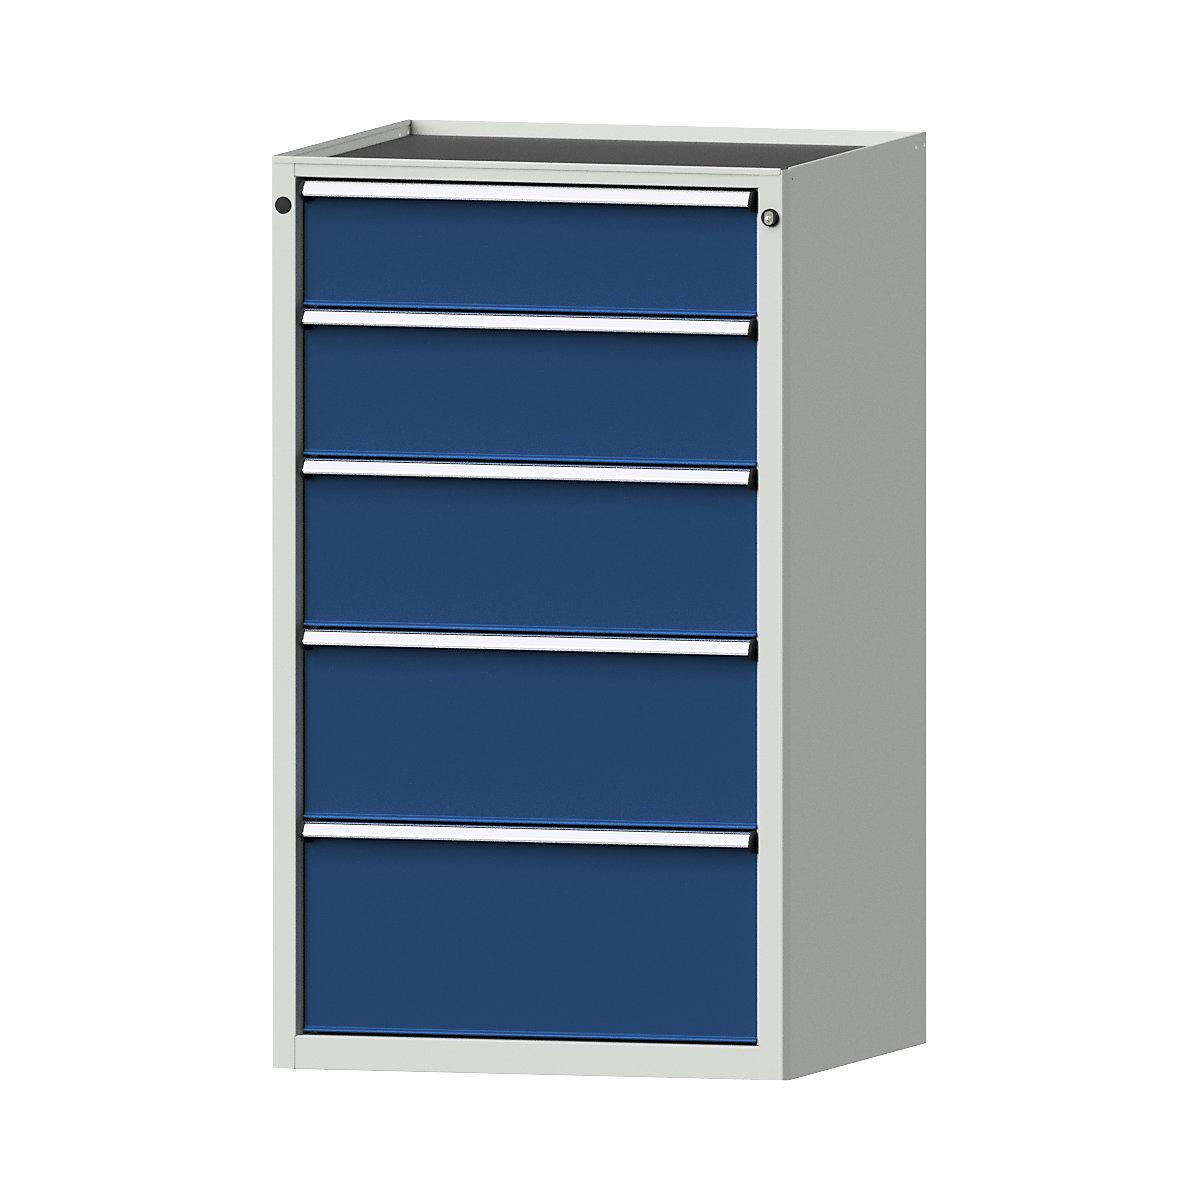 Drawer cupboard – ANKE, WxD 760 x 675 mm, 5 drawers, height 1280 mm, front in gentian blue-4